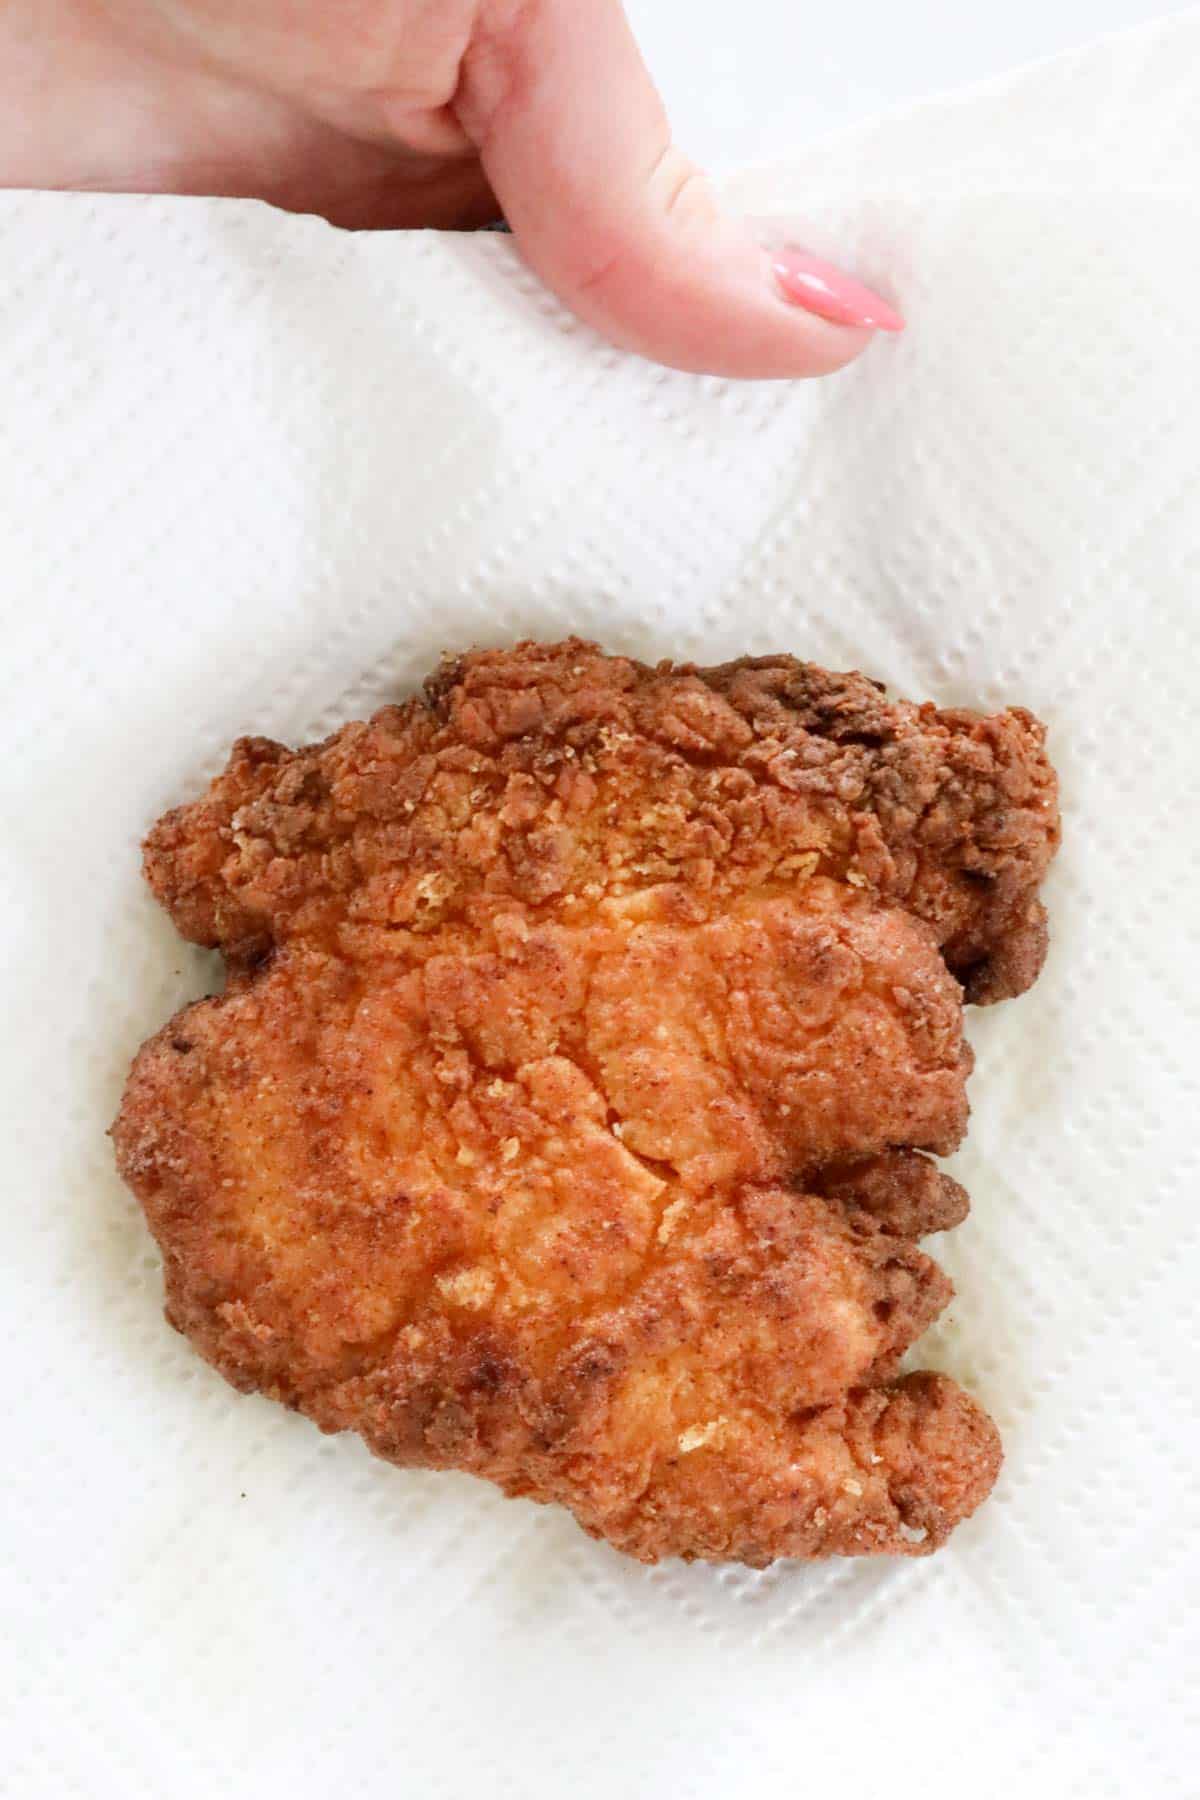 A super crispy fried chicken thigh on paper towel.